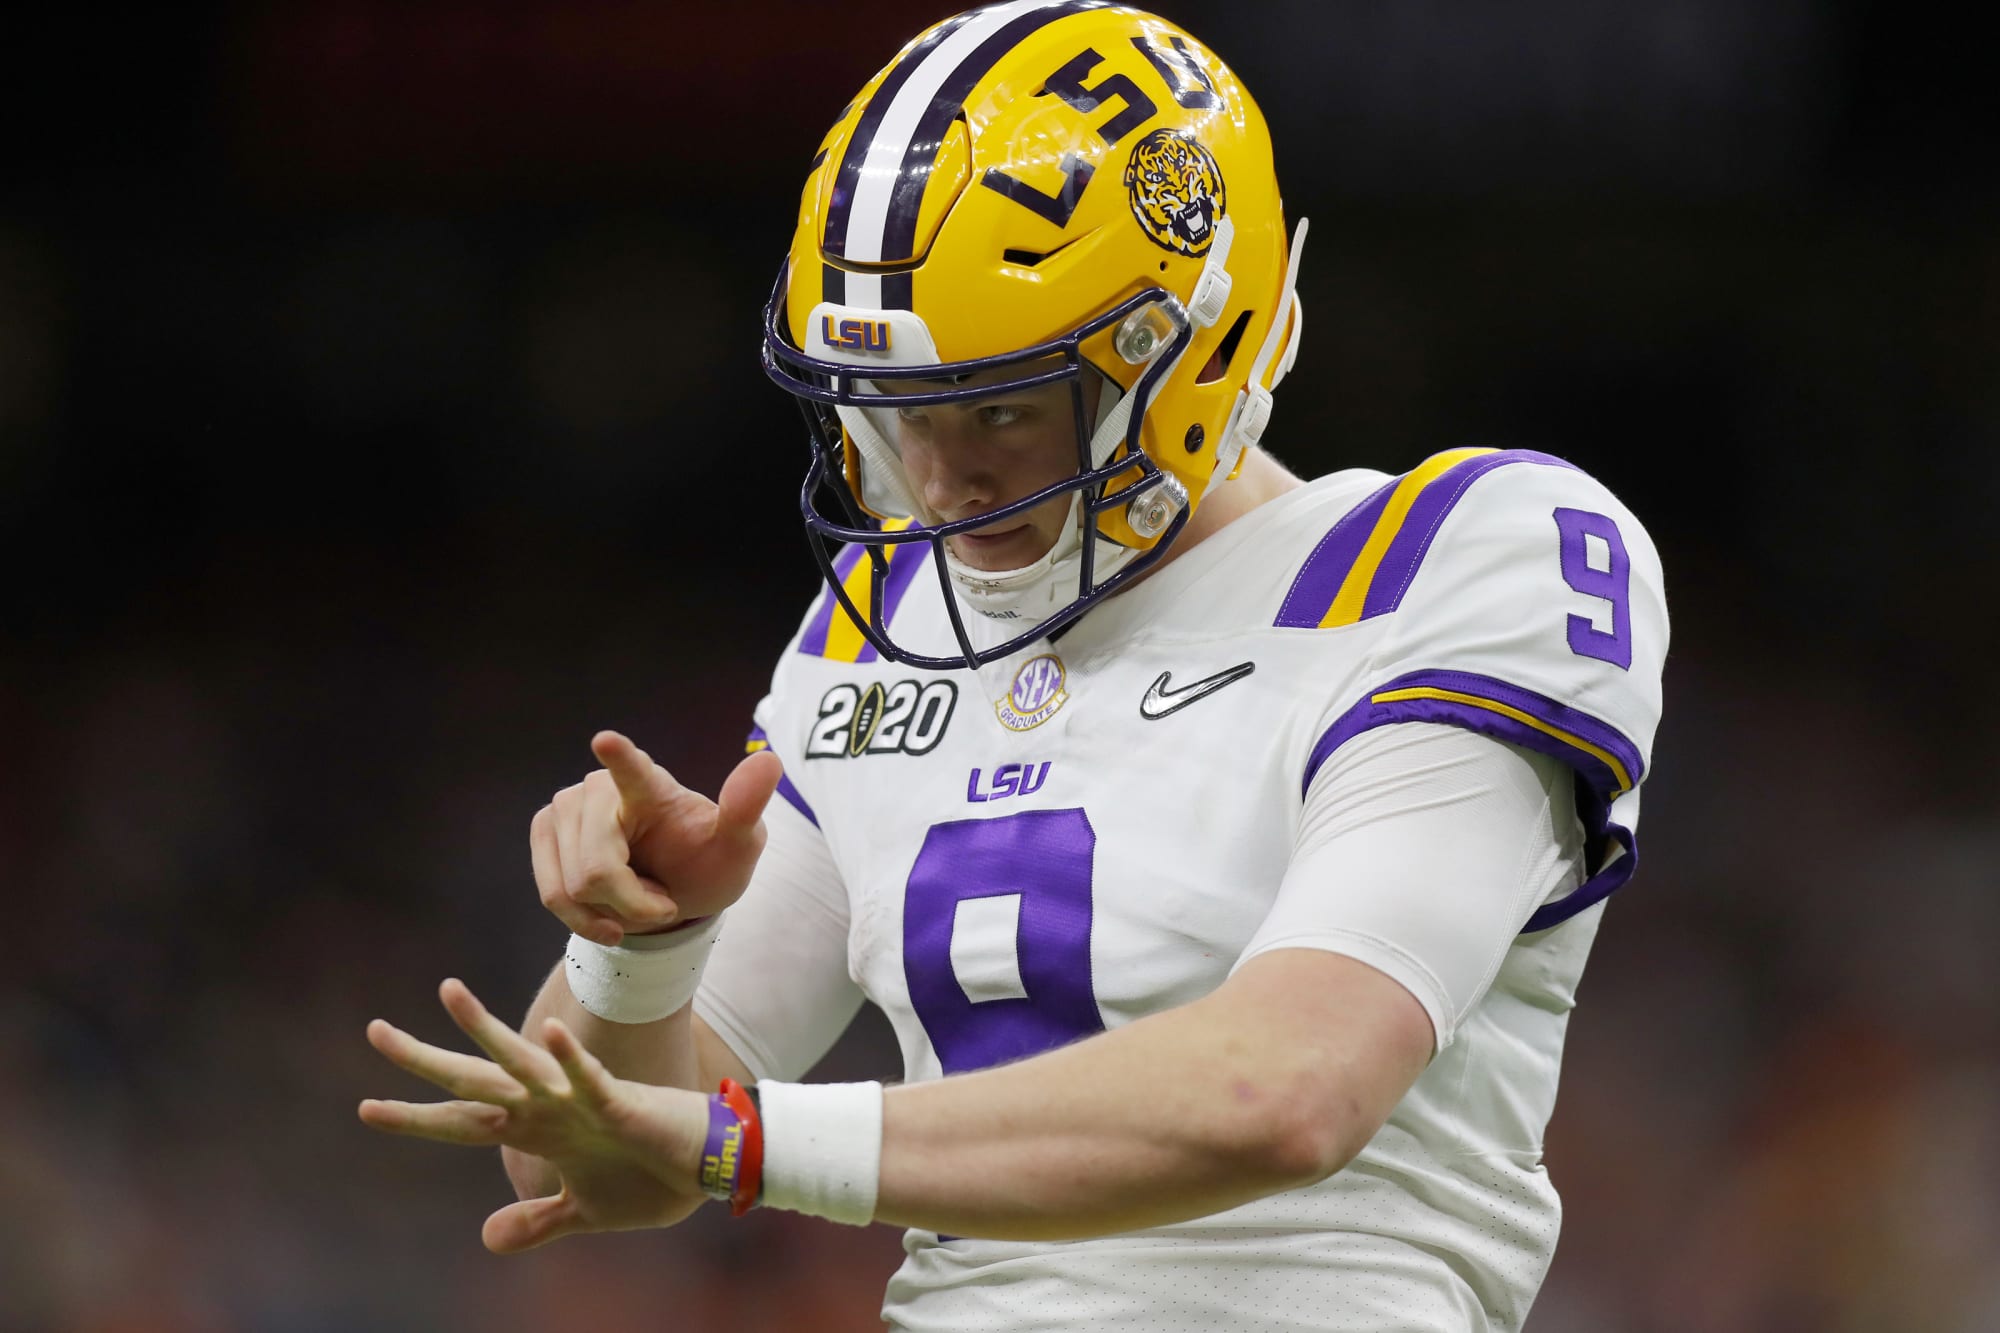 247Sports shortchanges LSU Football’s success this decade BVM Sports